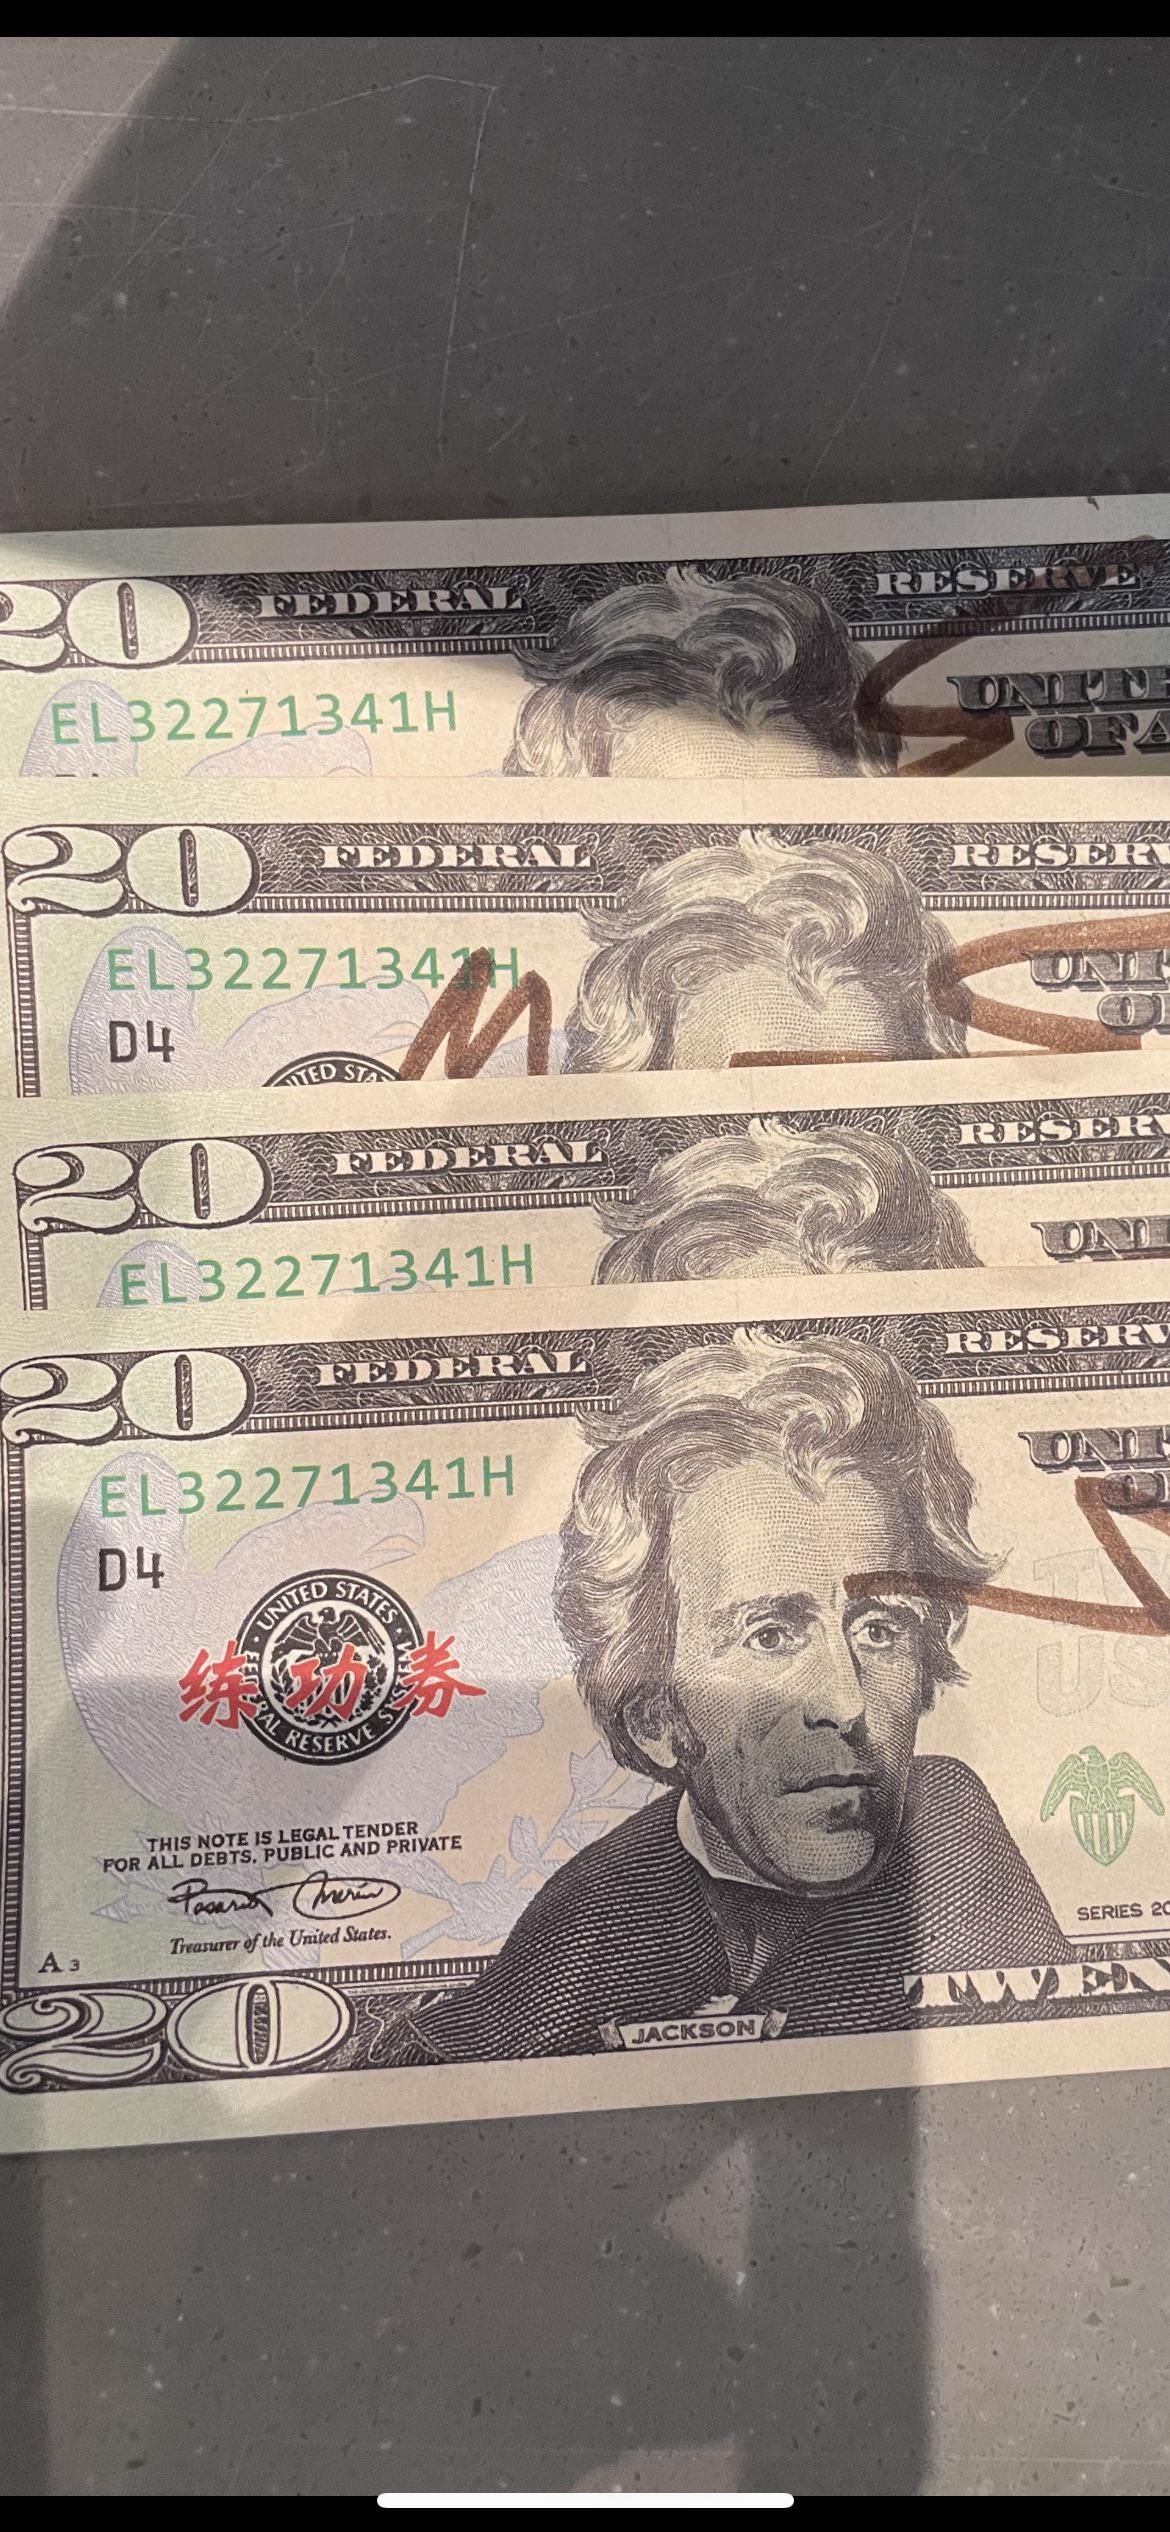 I work at Starbucks and someone tried to pay with these $20 bills today.